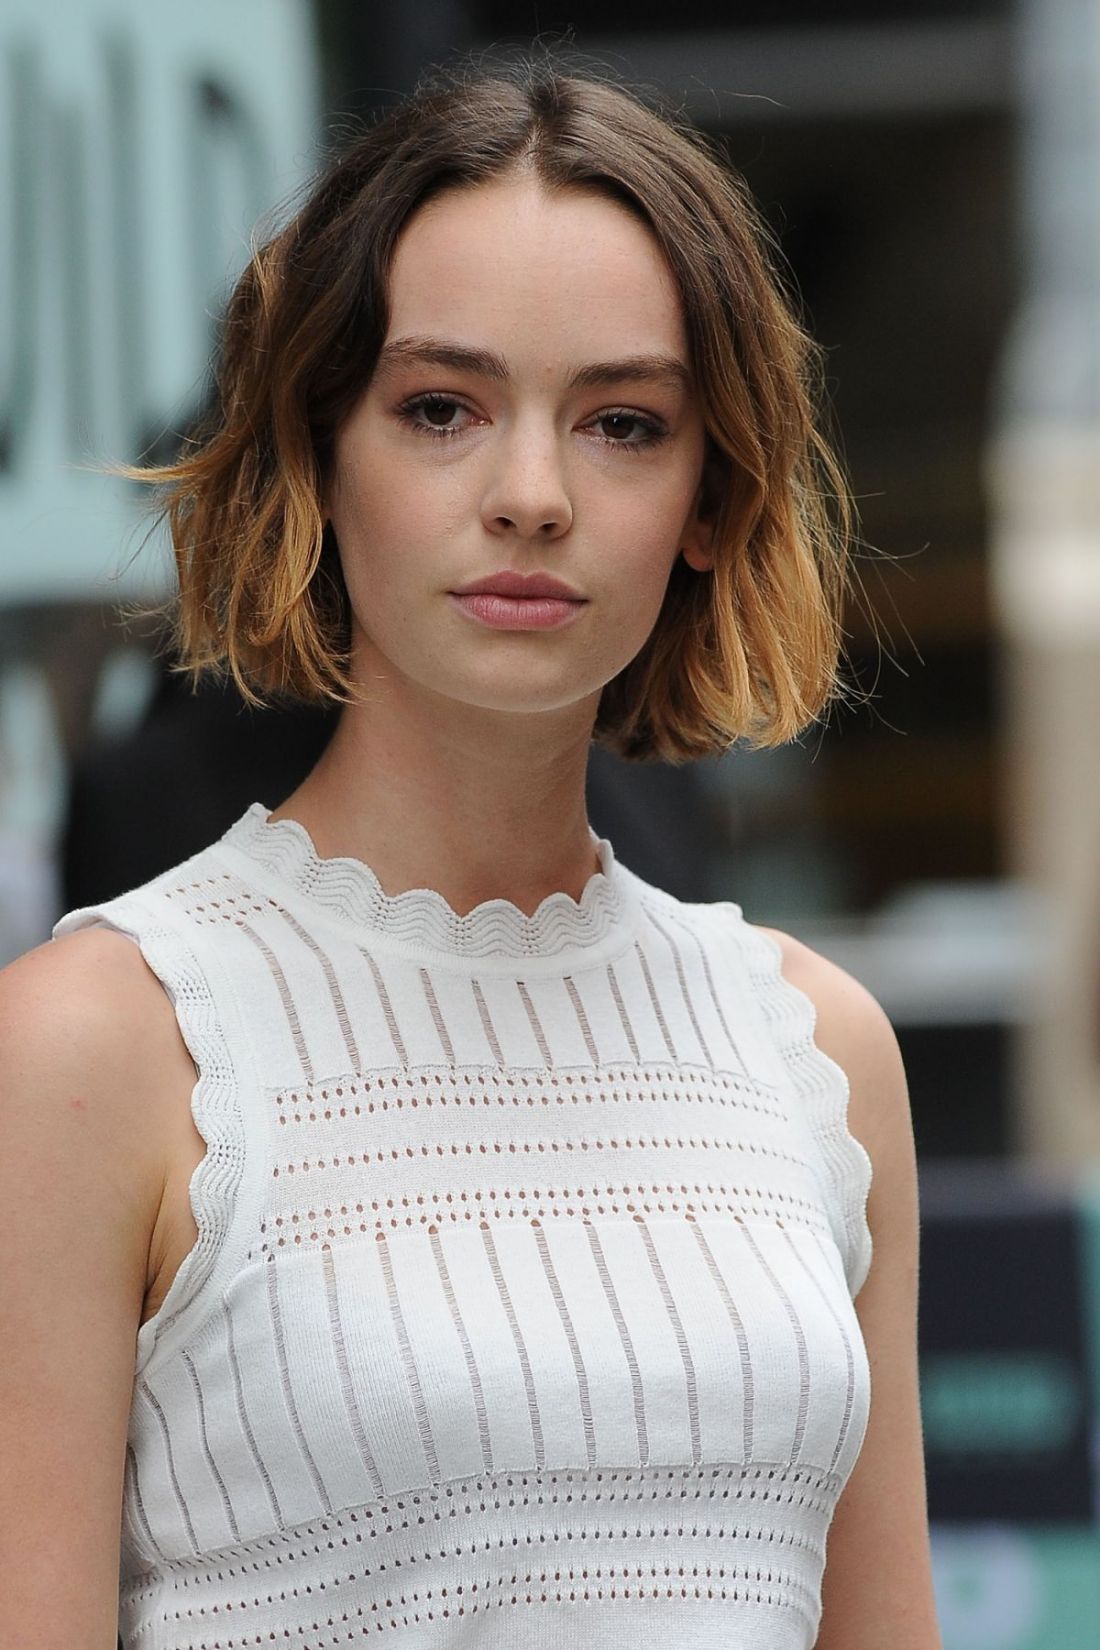 andrew mc intyre add photo brigette lundy paine sexy